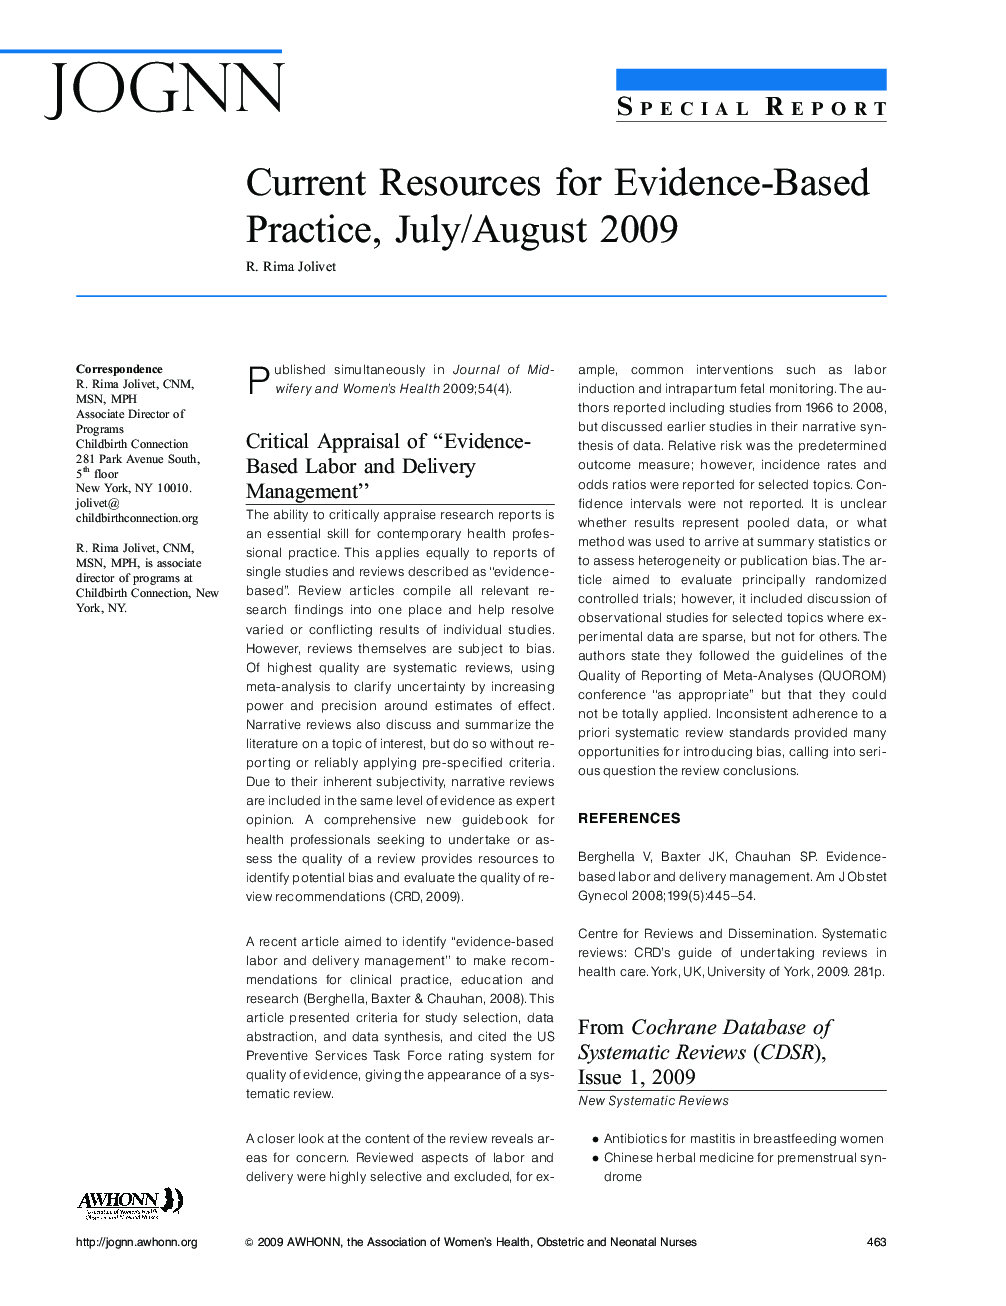 Current Resources for Evidence-Based Practice, July/August 2009